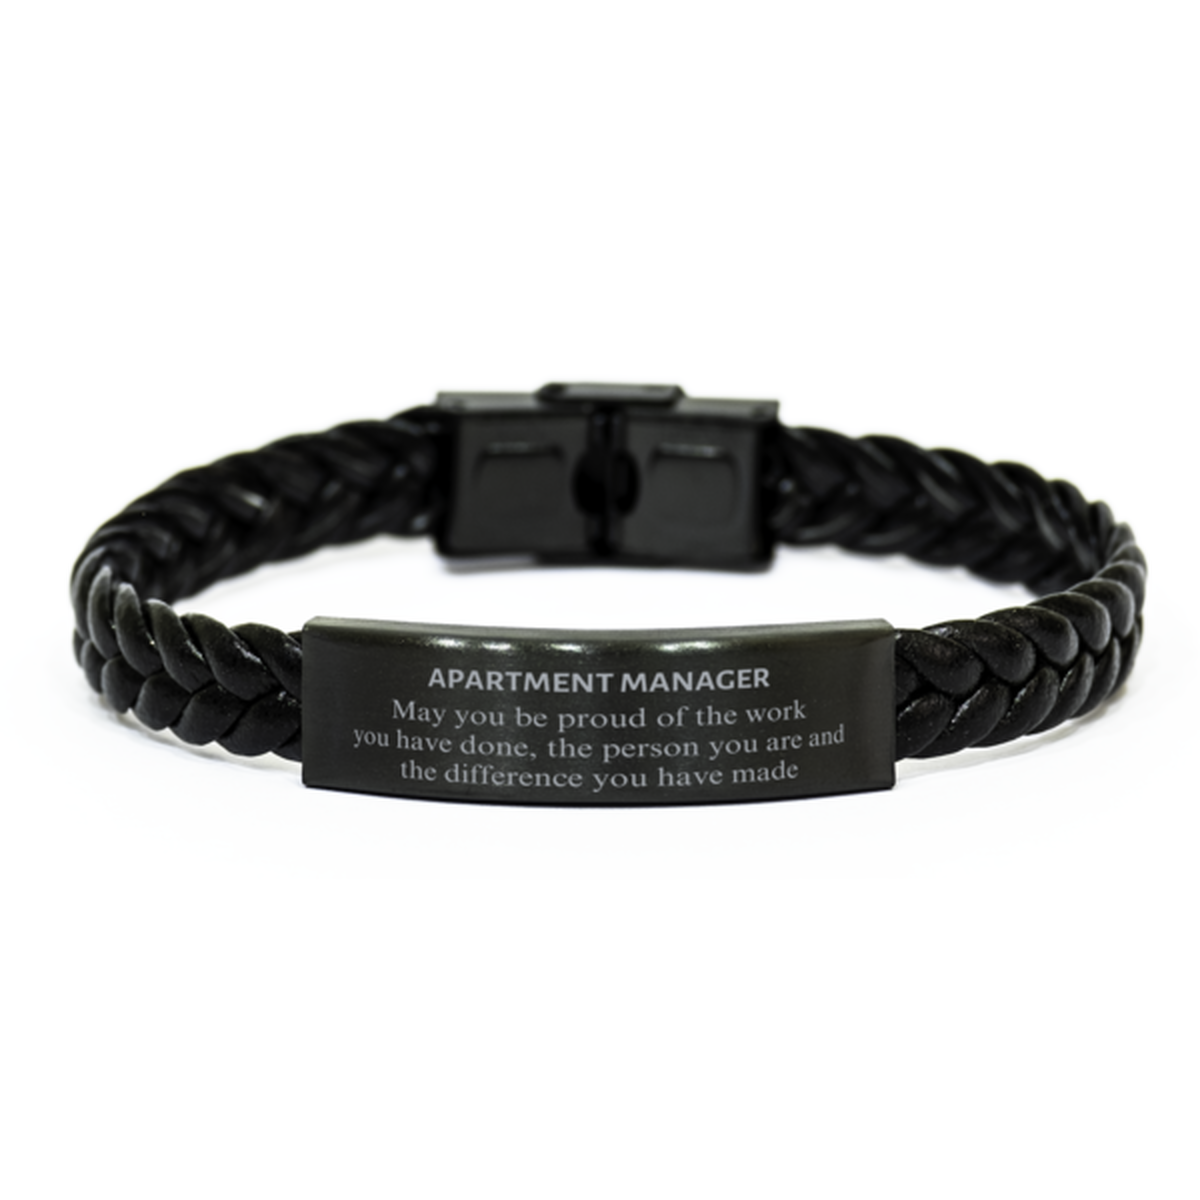 Apartment Manager May you be proud of the work you have done, Retirement Apartment Manager Braided Leather Bracelet for Colleague Appreciation Gifts Amazing for Apartment Manager